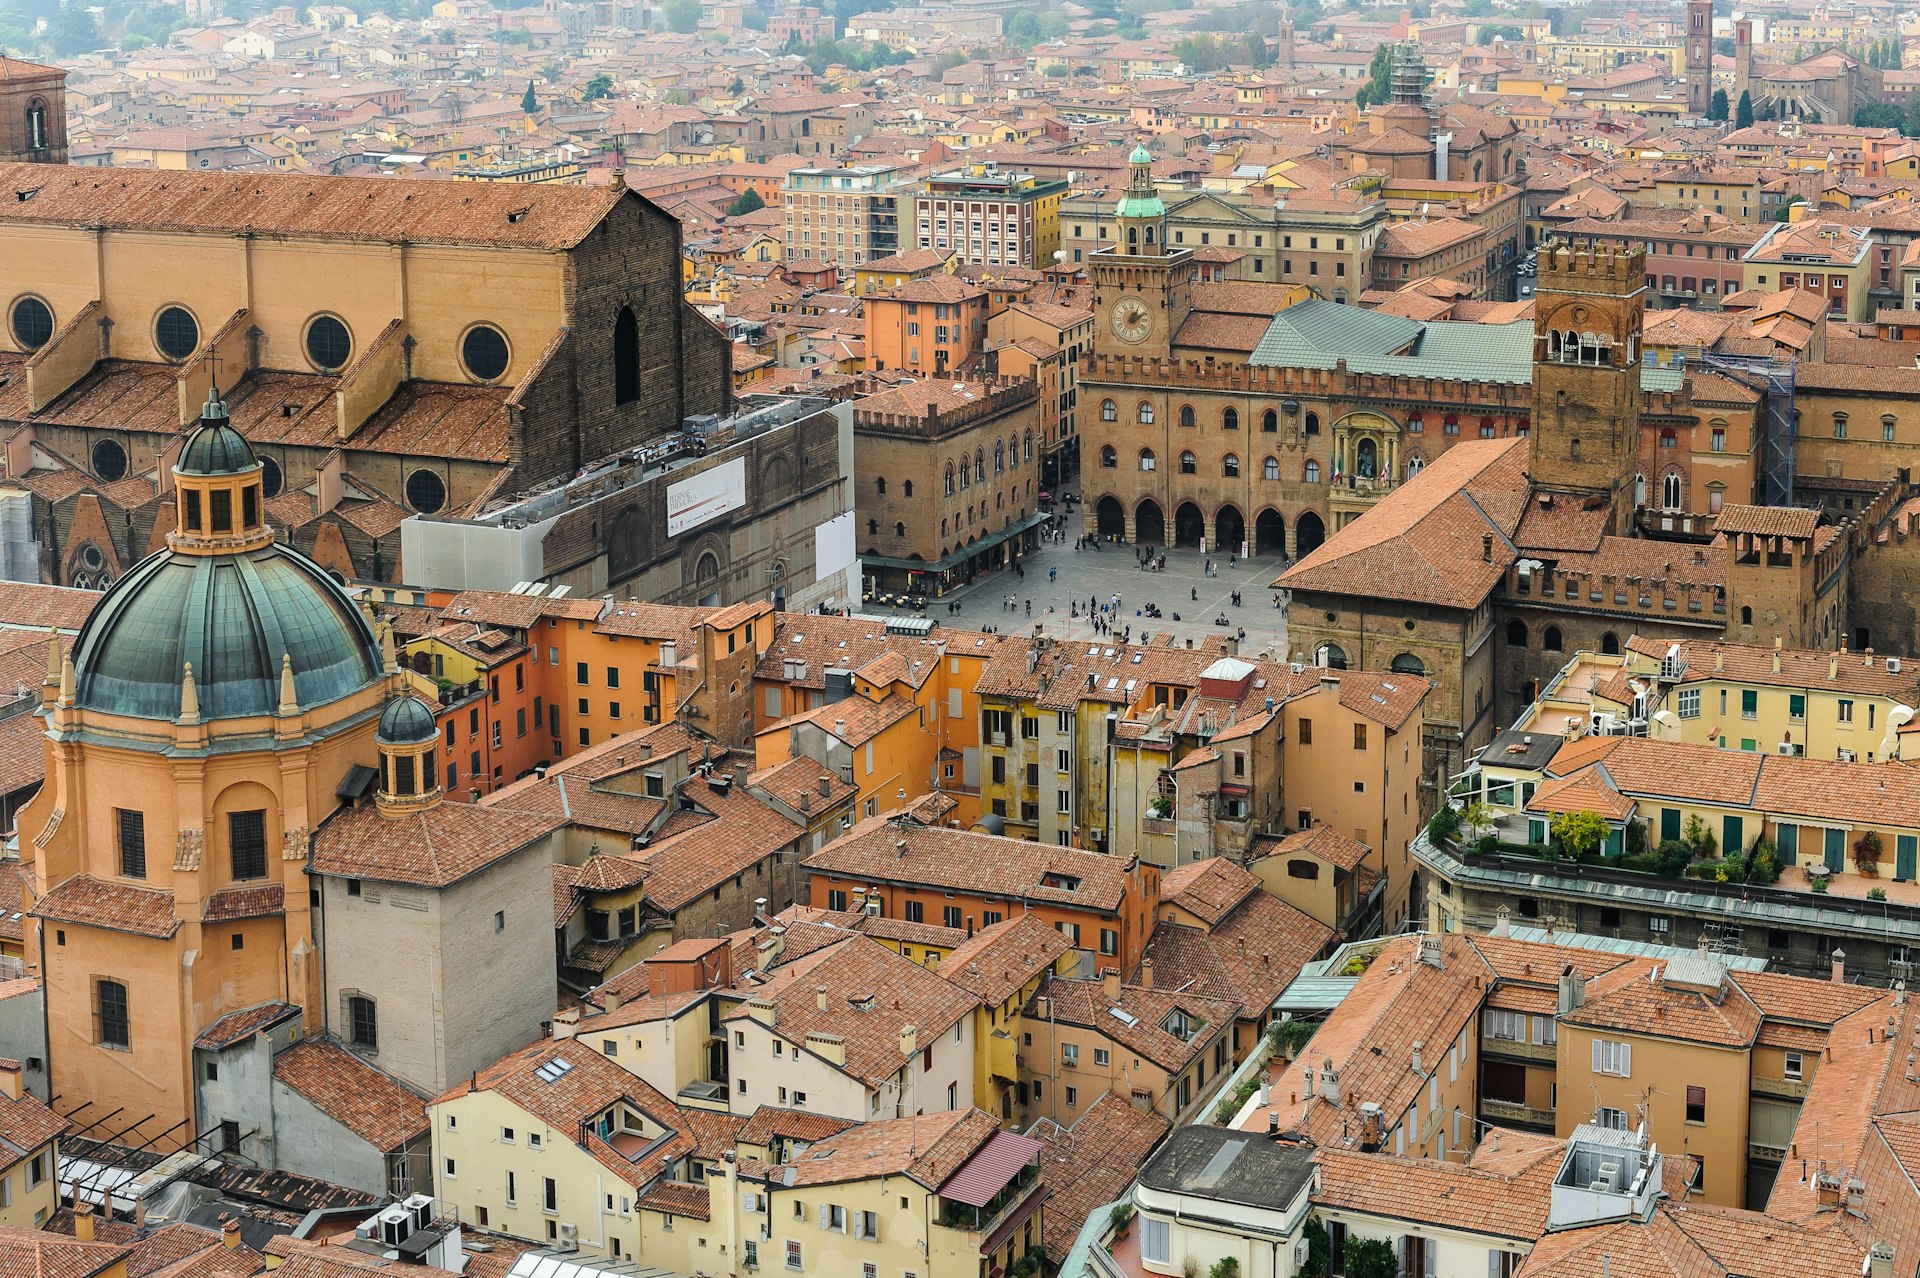 An aerial view of the old town streets of Bologna, Italy.